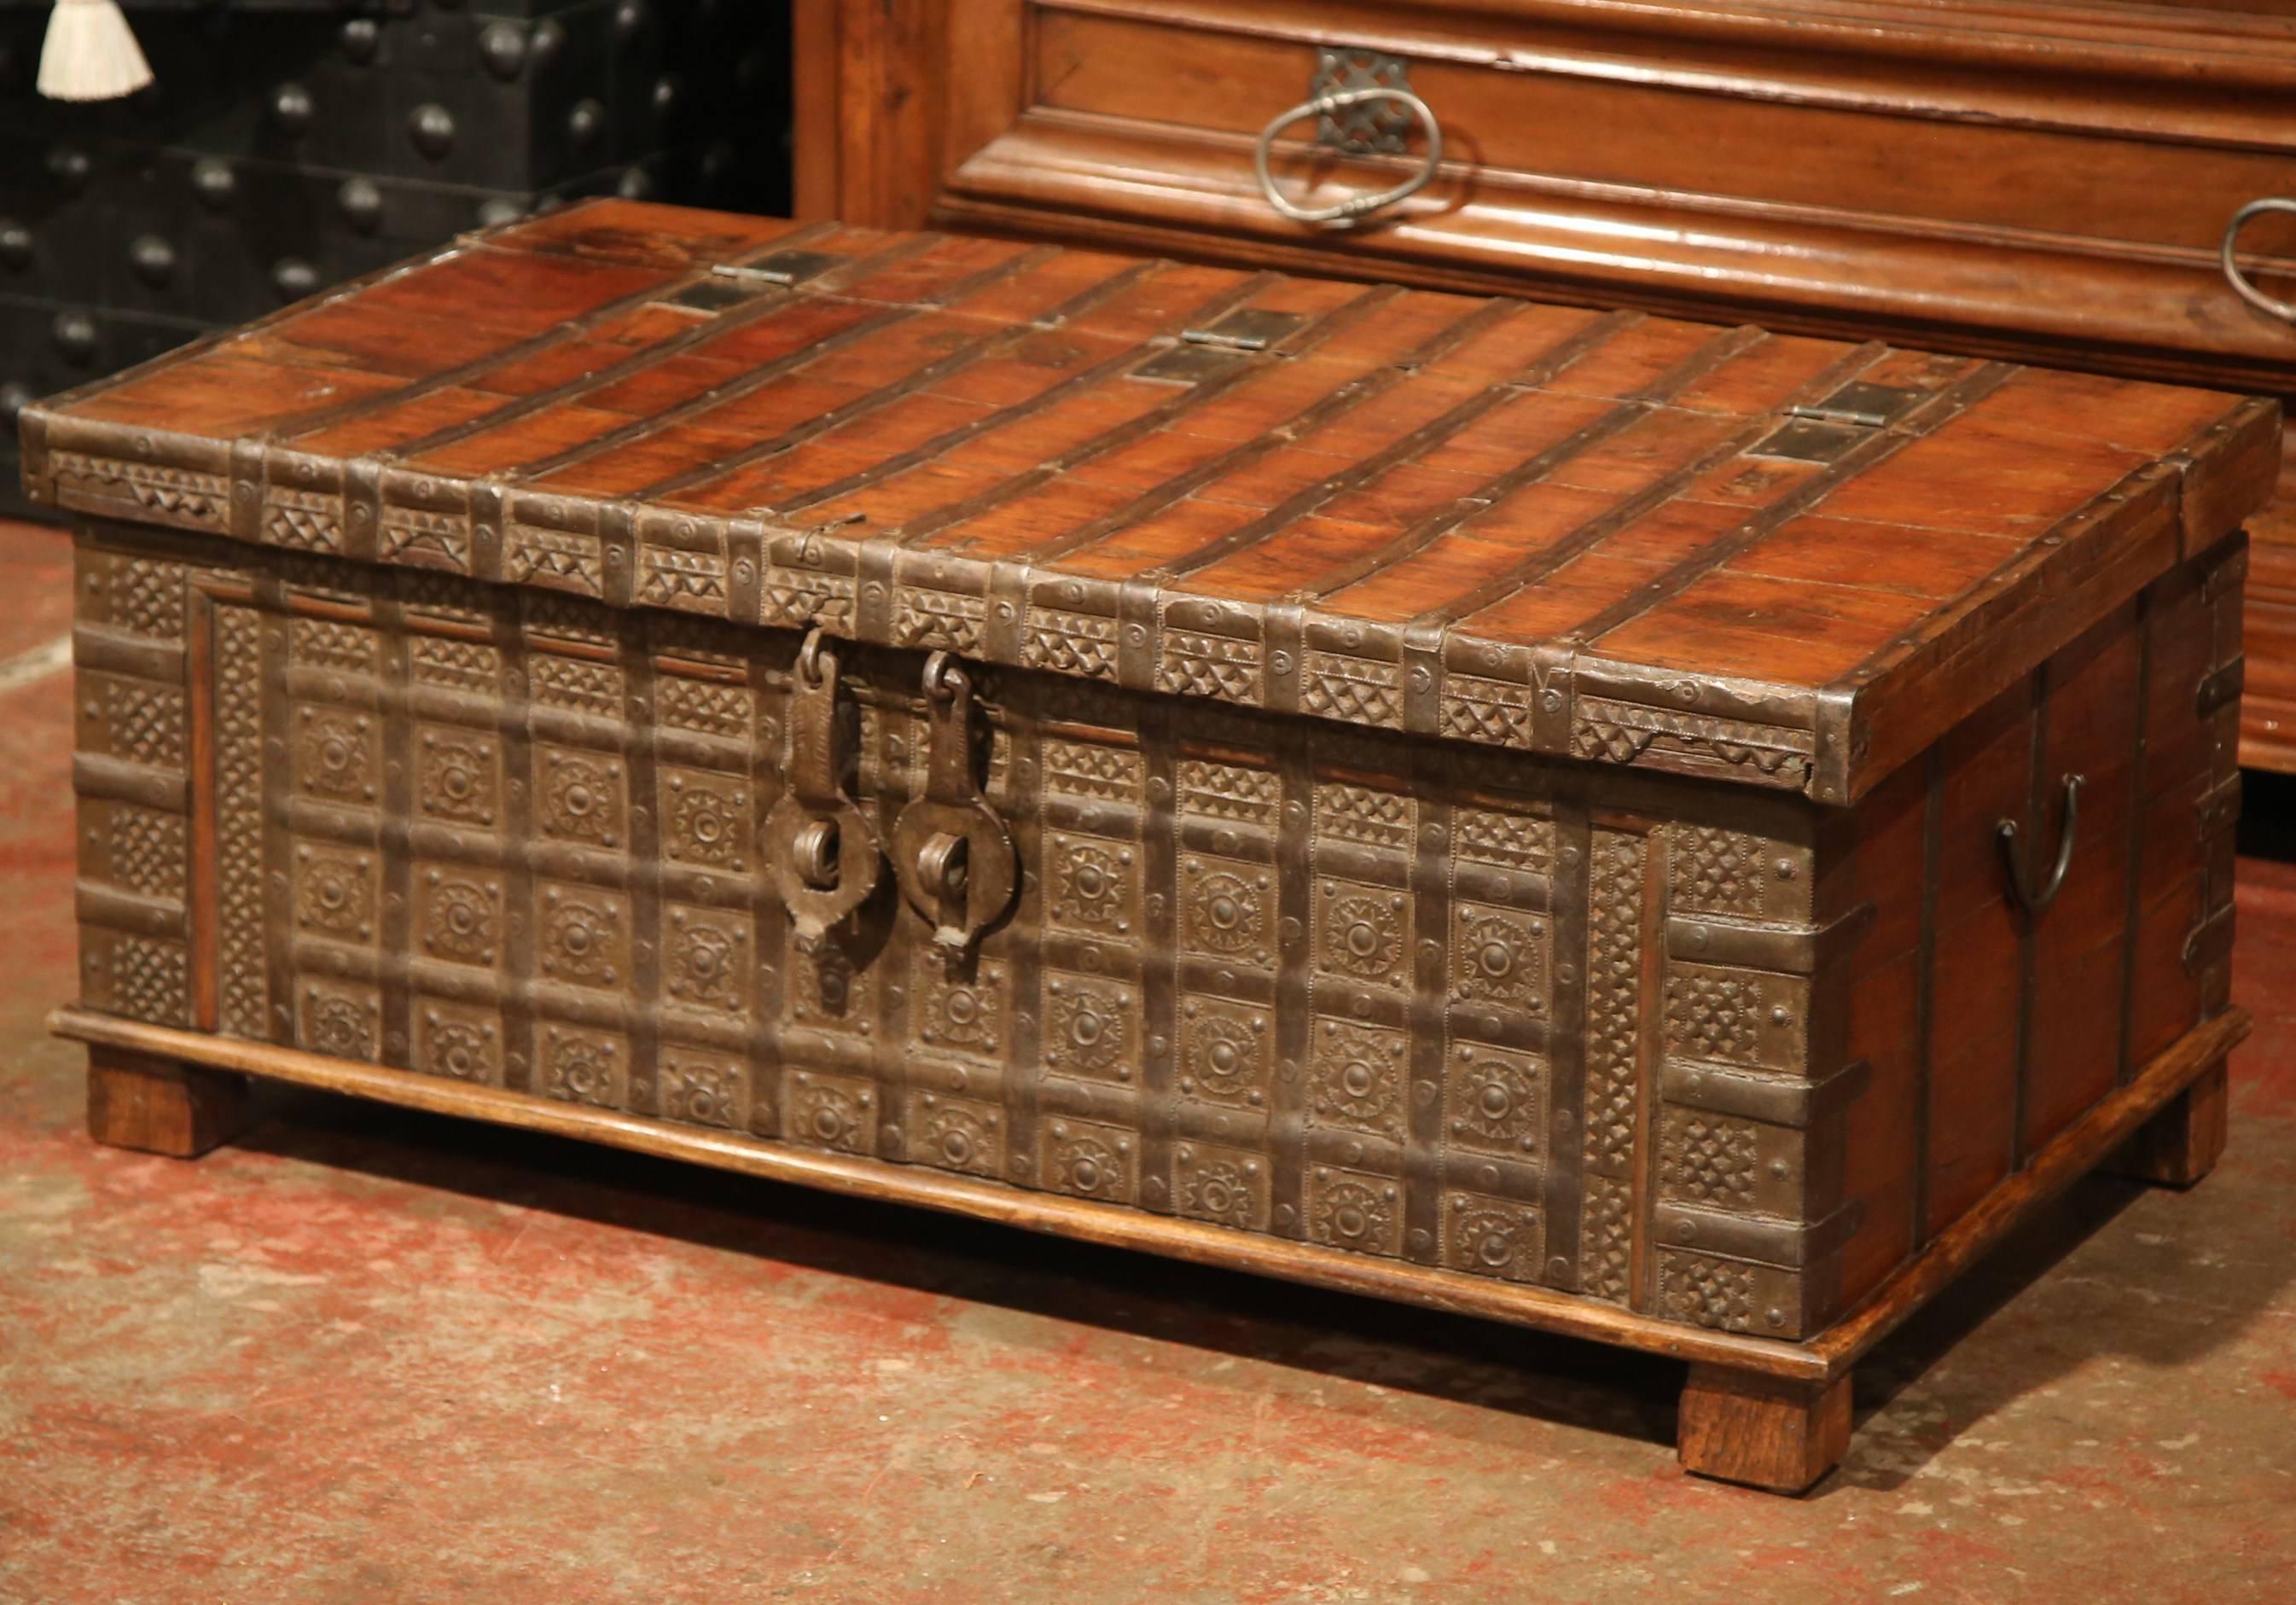 Hand-Carved 19th Century English Carved Chestnut Trunk Coffee Table with Heavy Hardware